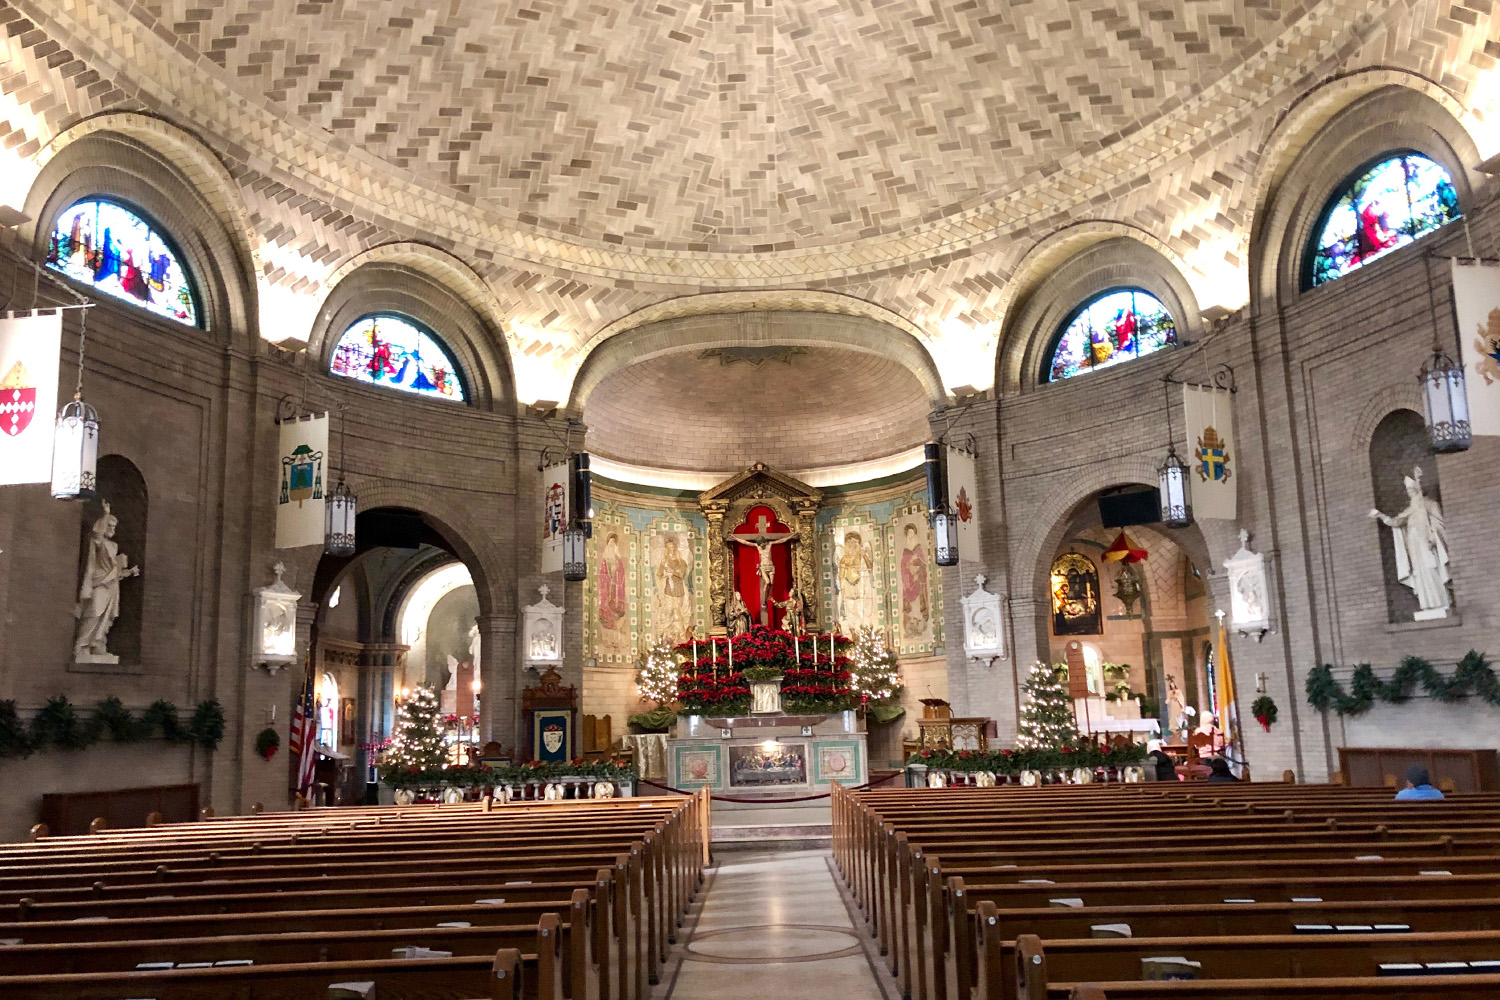 The Basilica of St. Lawrence, designed by Spanish architect Rafael Guastavino and built in 1905, is located at the corner of Haywood Street and Flint Street in Asheville, North Carolina. Featuring a large elliptical masonry dome, the Spanish Baroque-style building features many ornate details, and was elevated to the status of minor basilica in 1993.